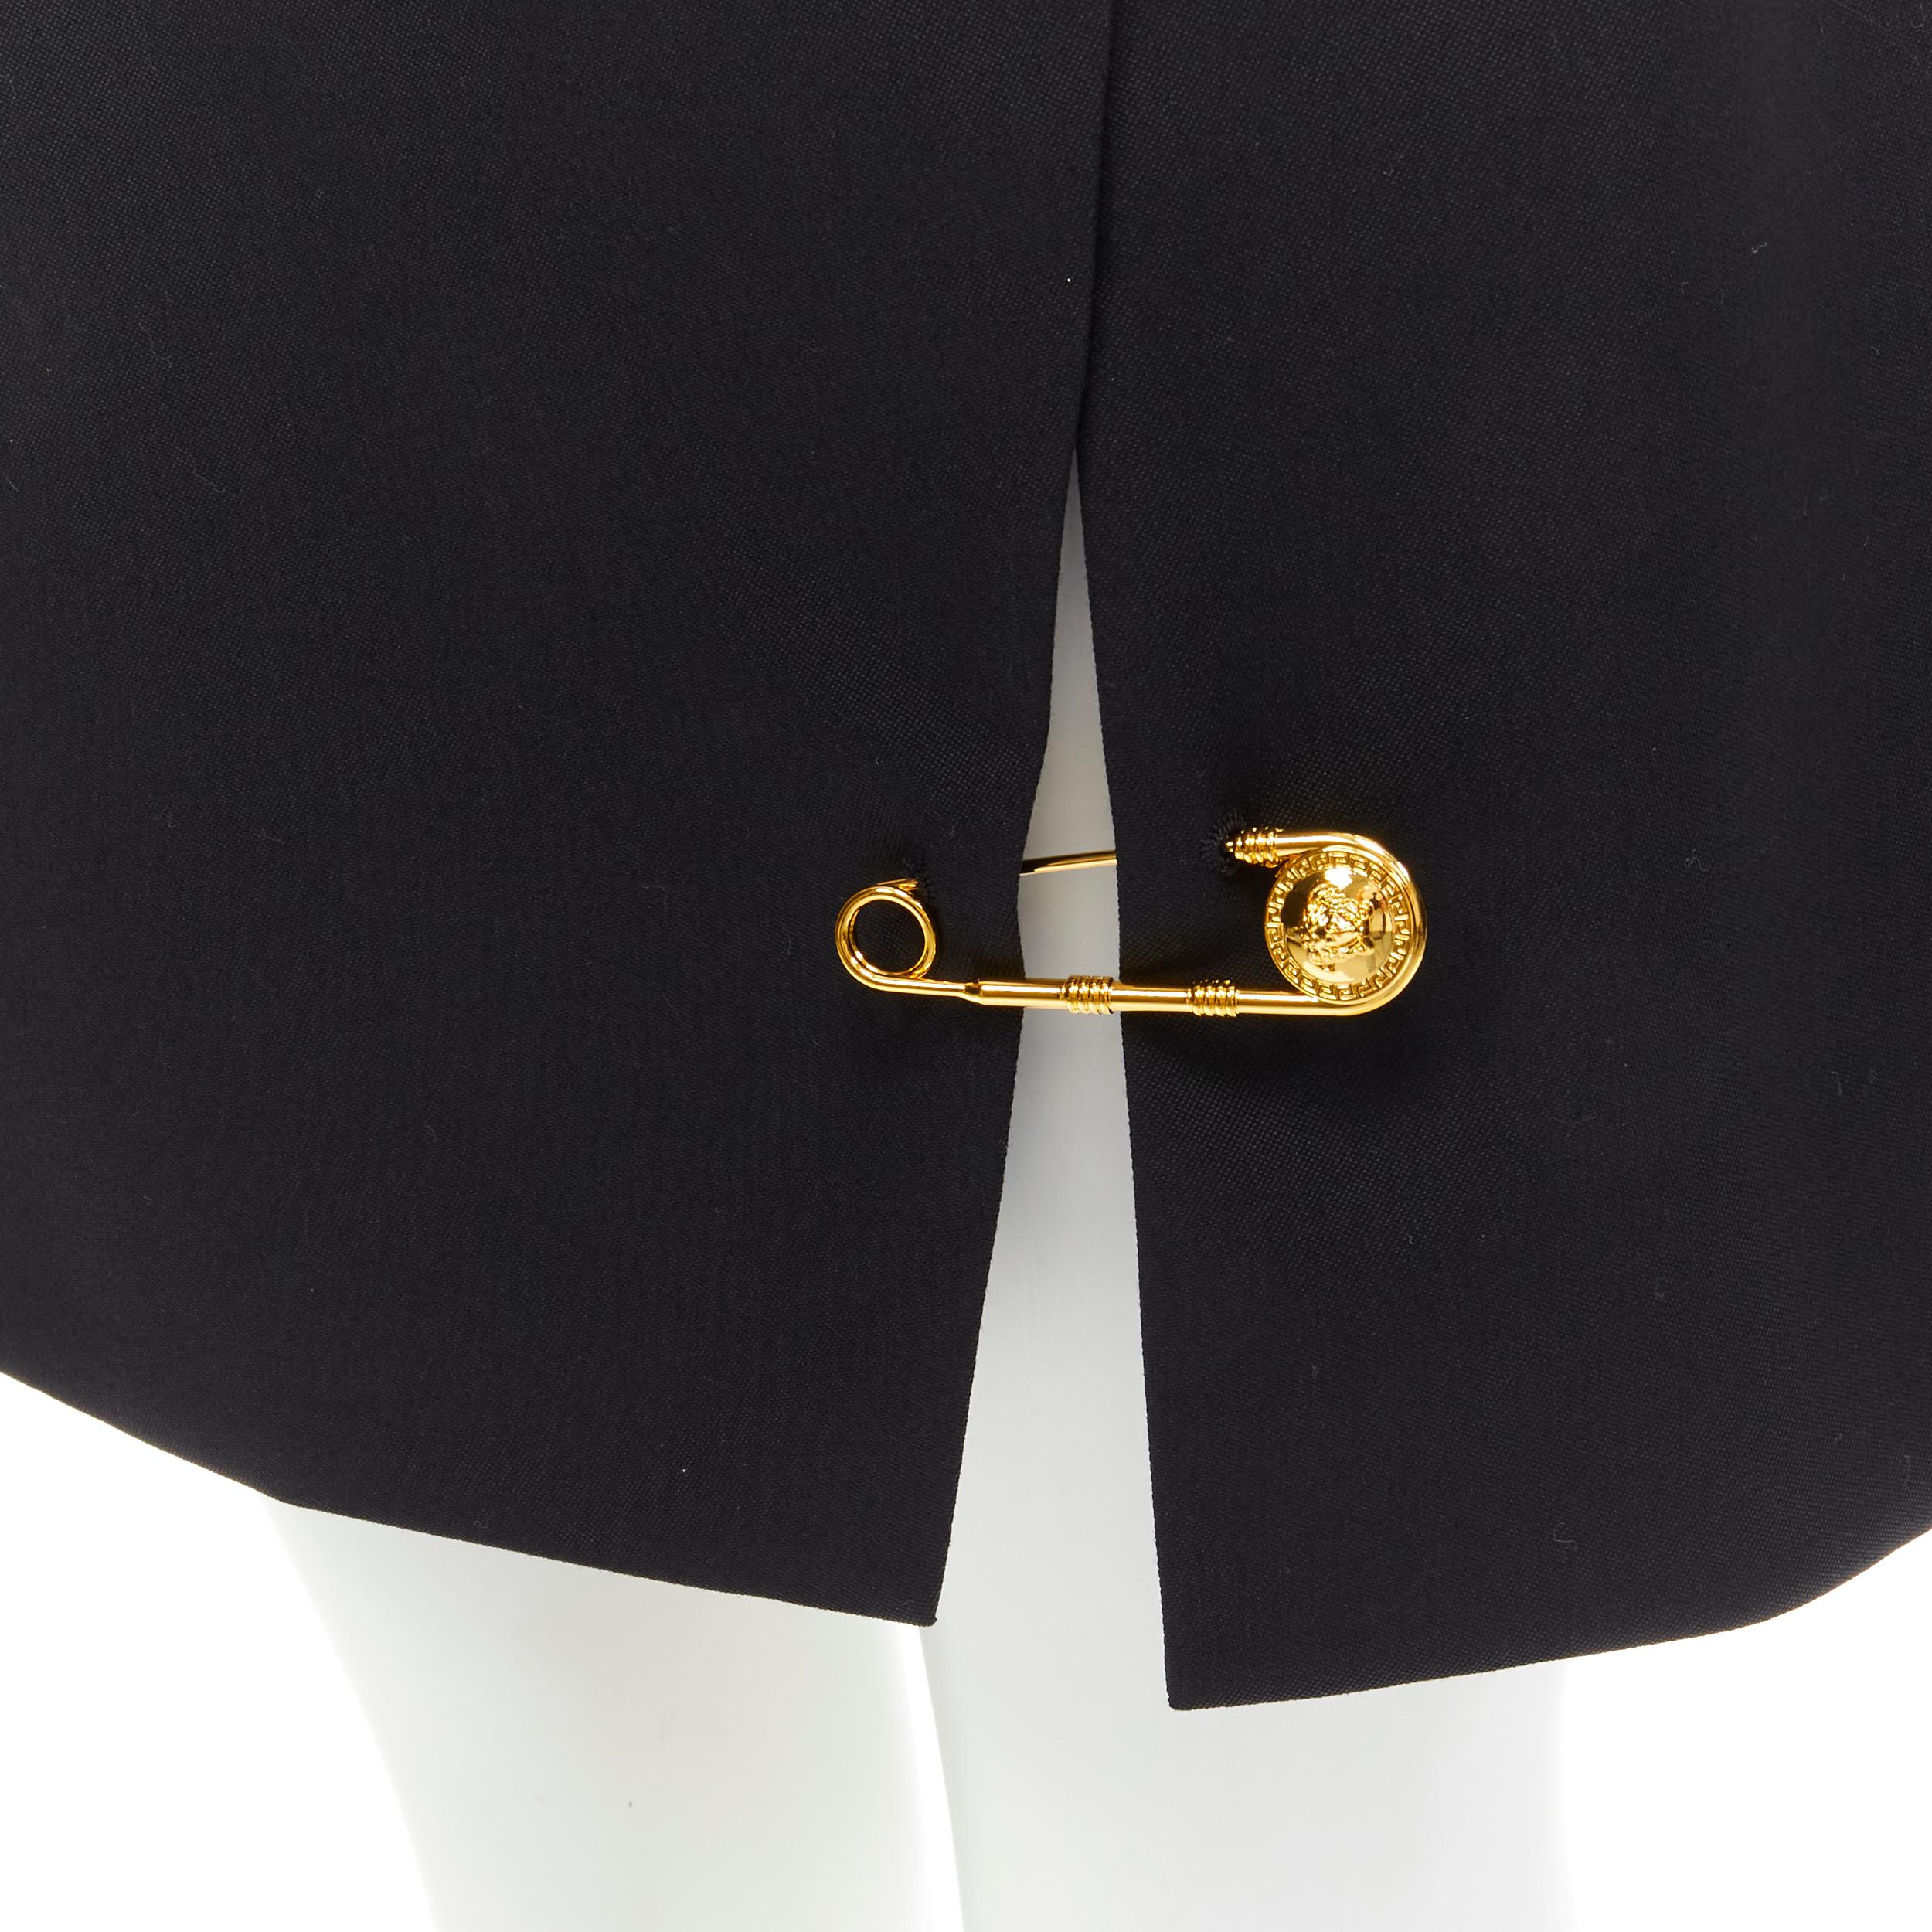 new VERSACE gold Medusa safety pin black viscose high slit skirt IT42 M 
Reference: TGAS/C00821 
Brand: Versace 
Designer: Donatella Versace 
Material: Viscose 
Color: Black 
Pattern: Solid 
Closure: Zip 
Extra Detail: Medusa head safety pin are